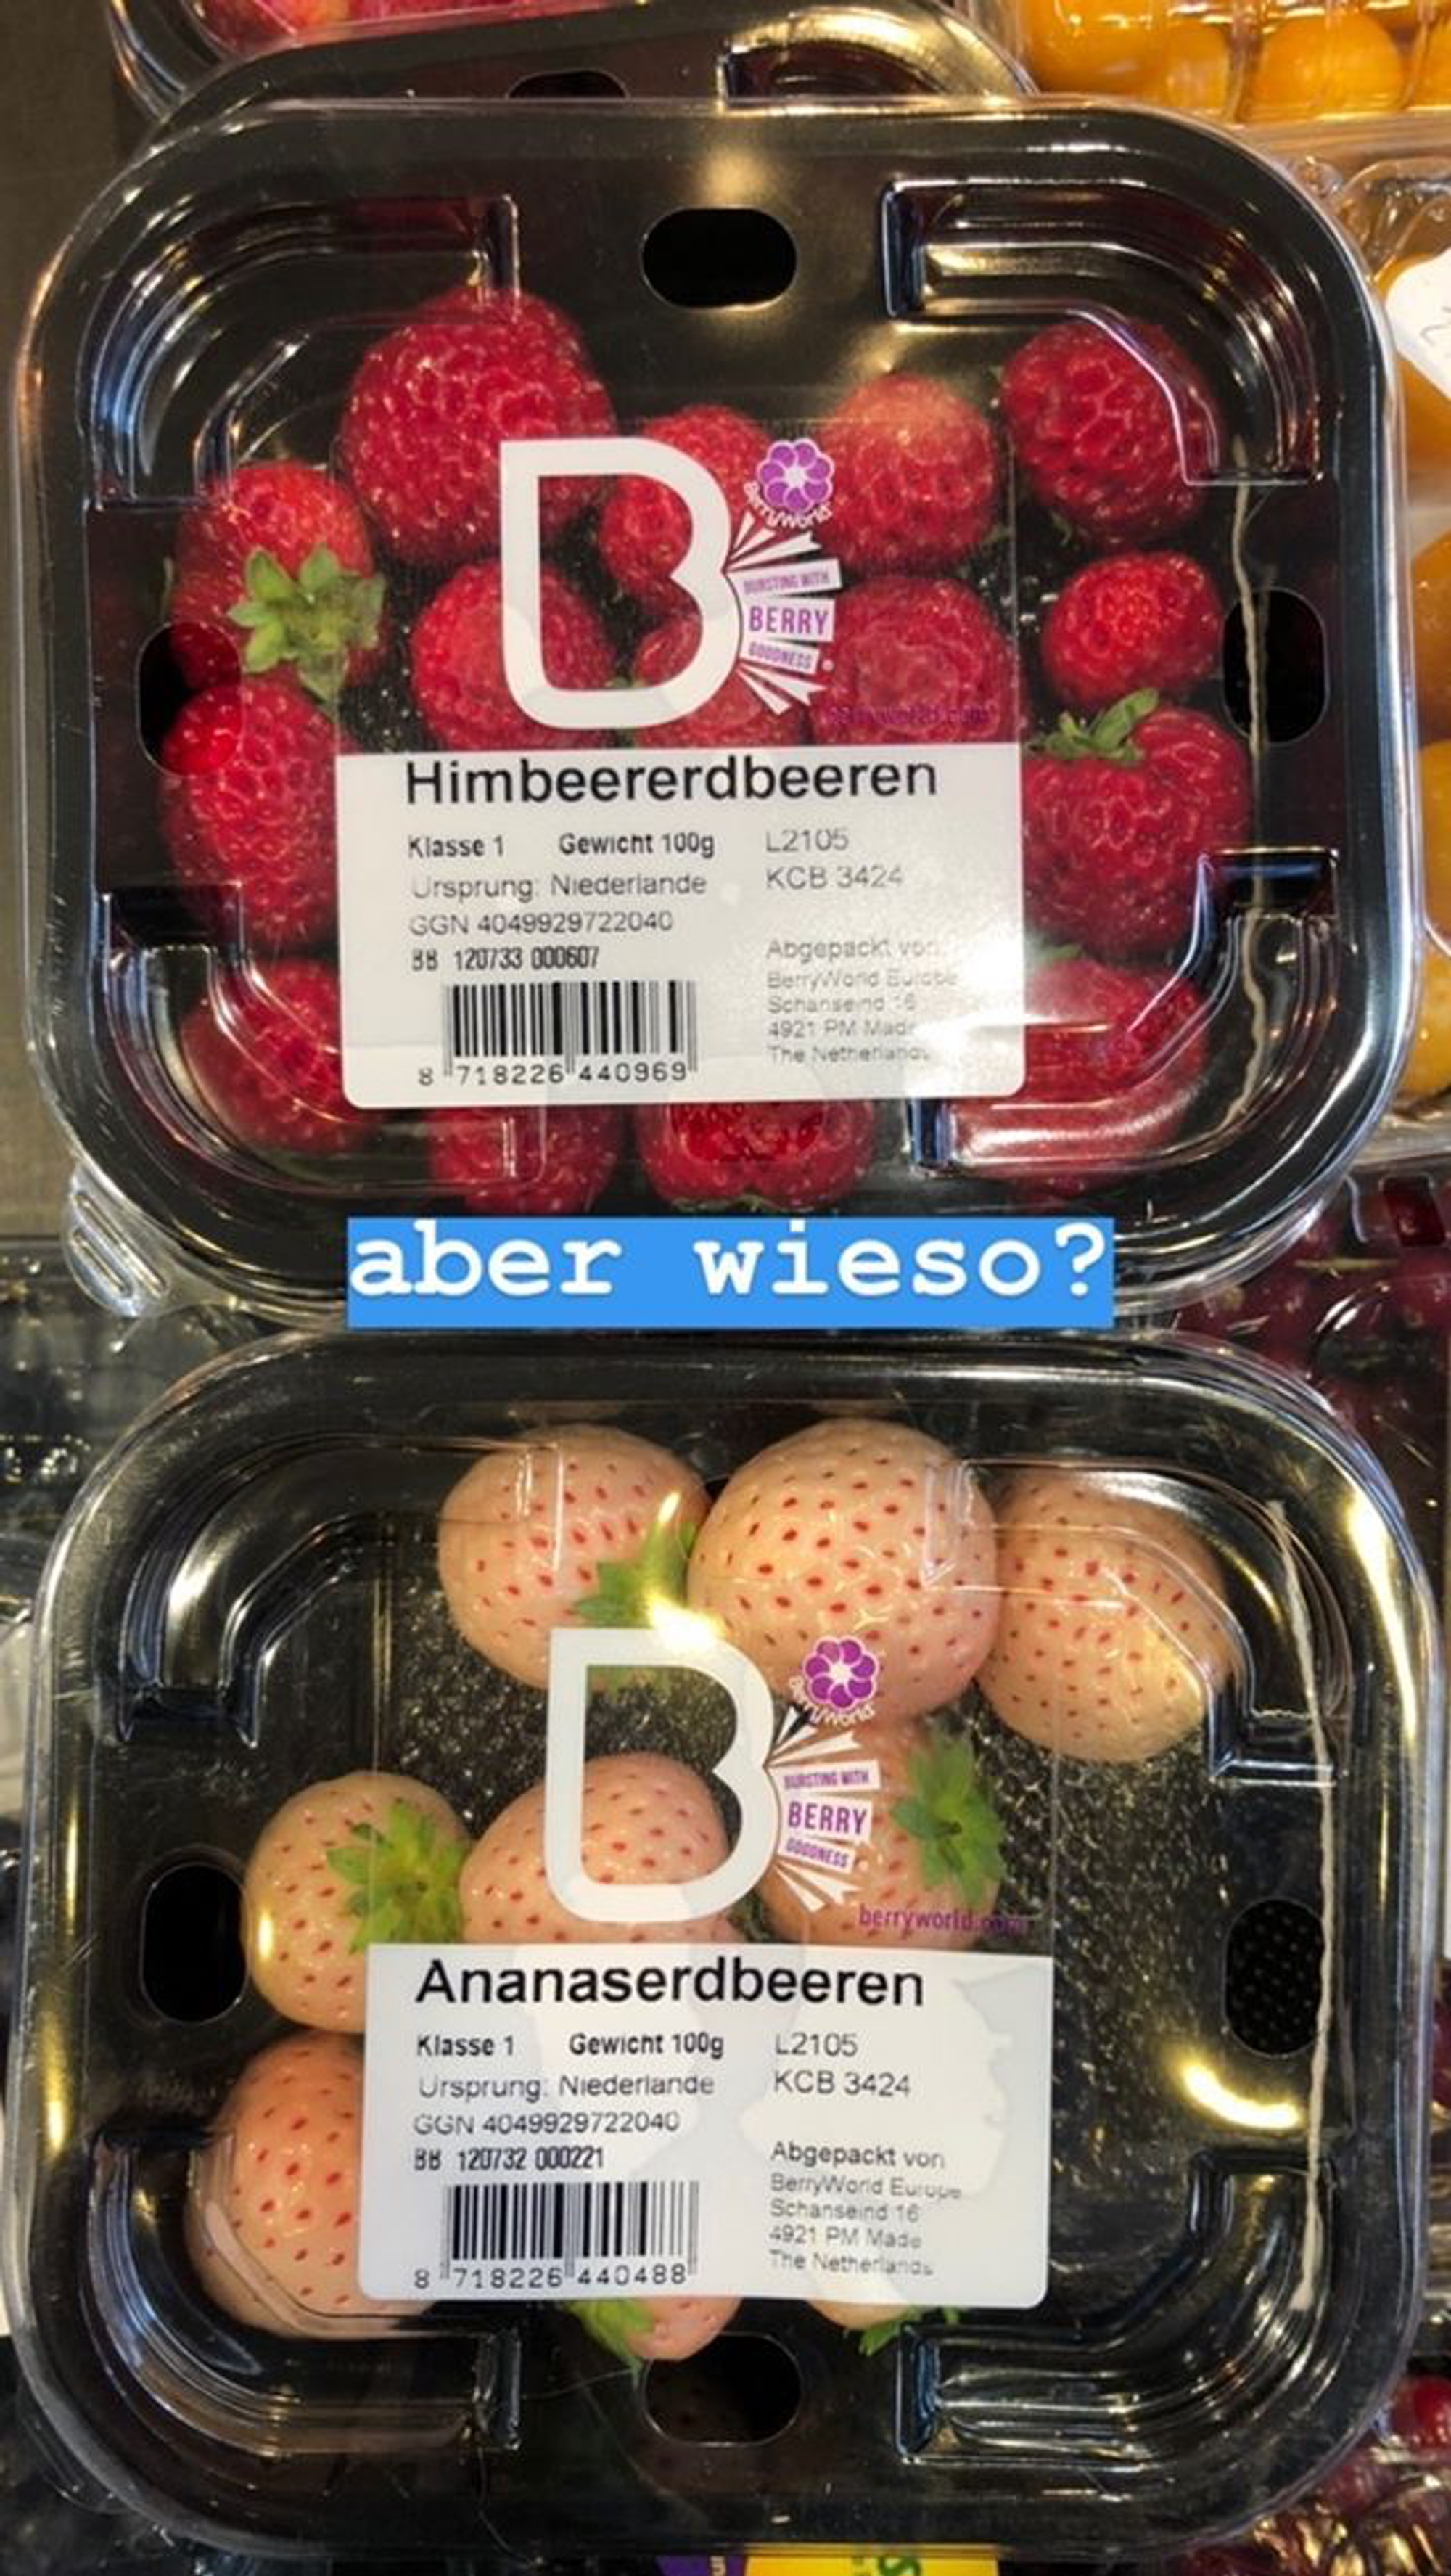 Where inpiration came from: genetically manipulated strawberries from The Netherlands.